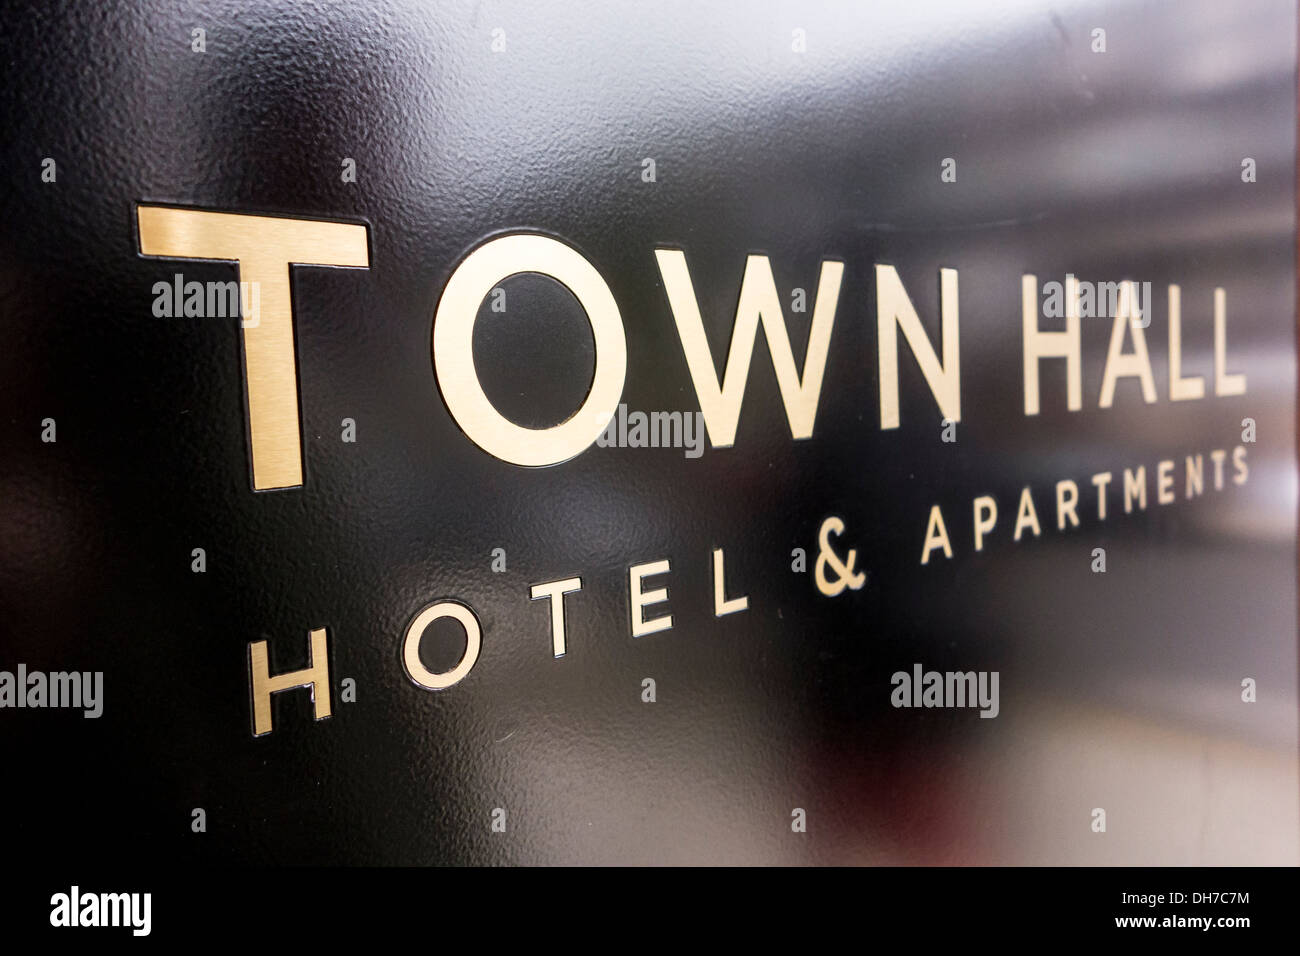 Town Hall Hotel in Bethnal Green, London, UK Stock Photo